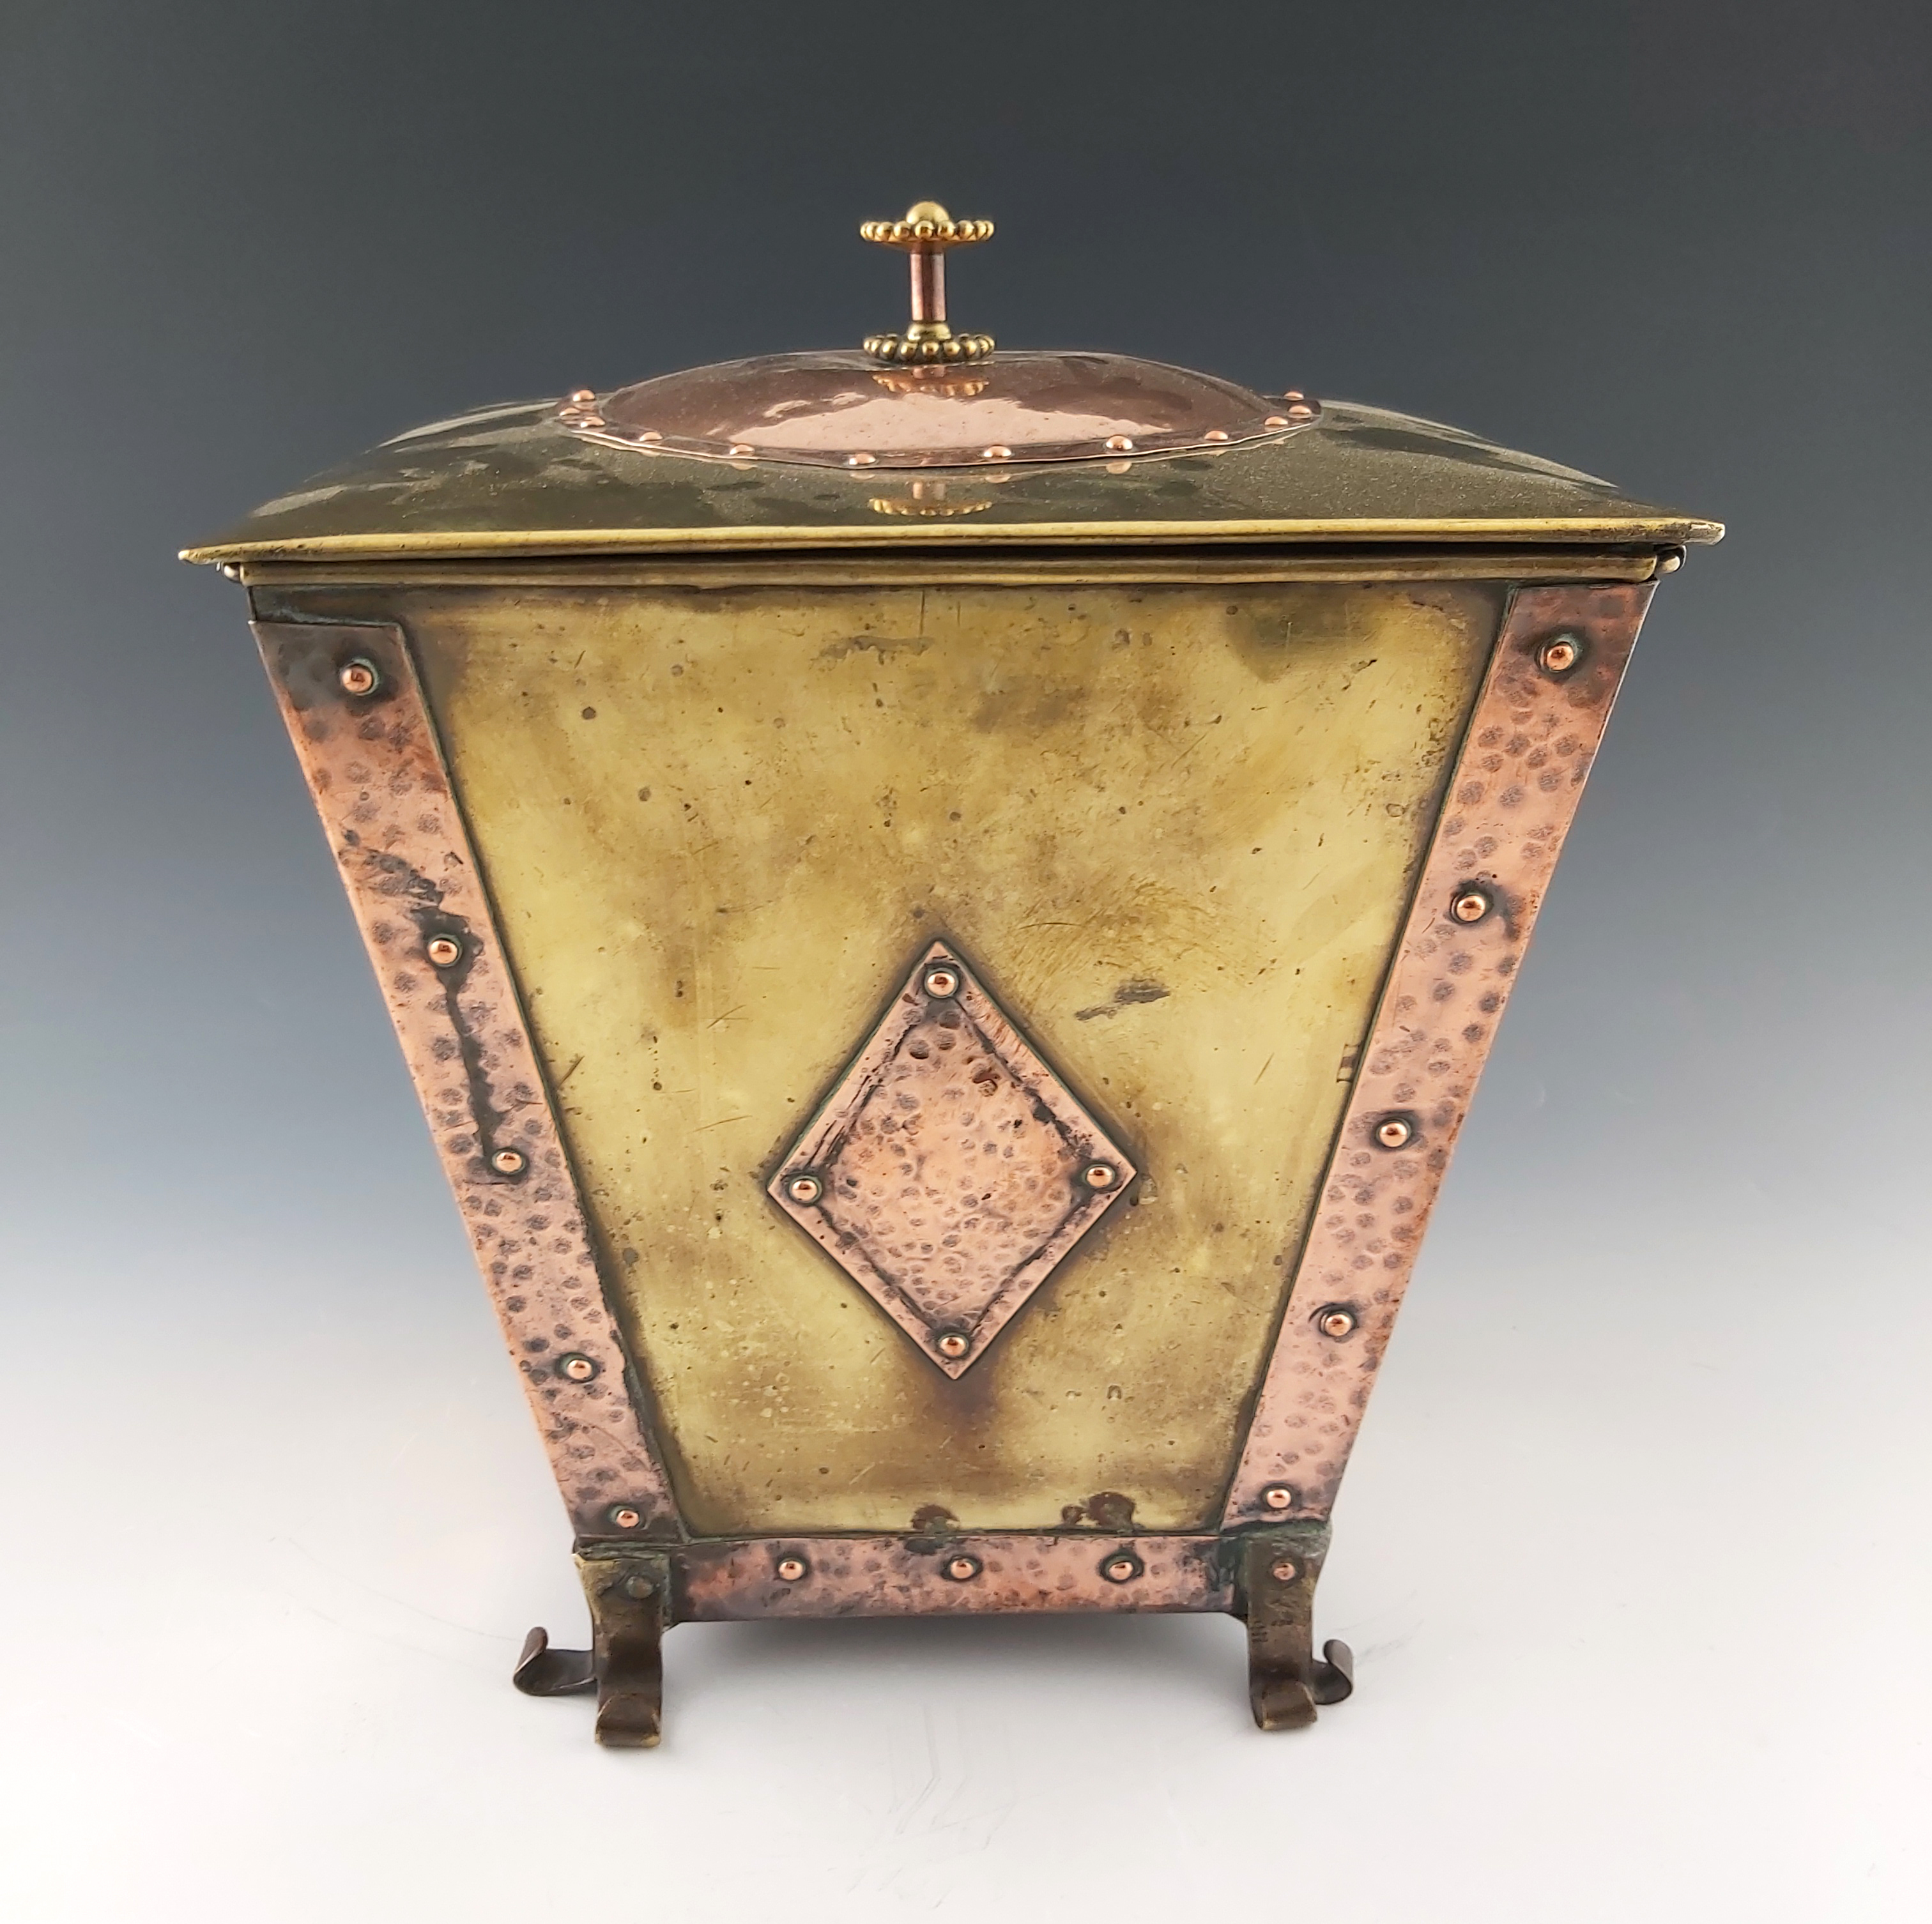 An Arts and Crafts copper and brass coal box - Image 2 of 3